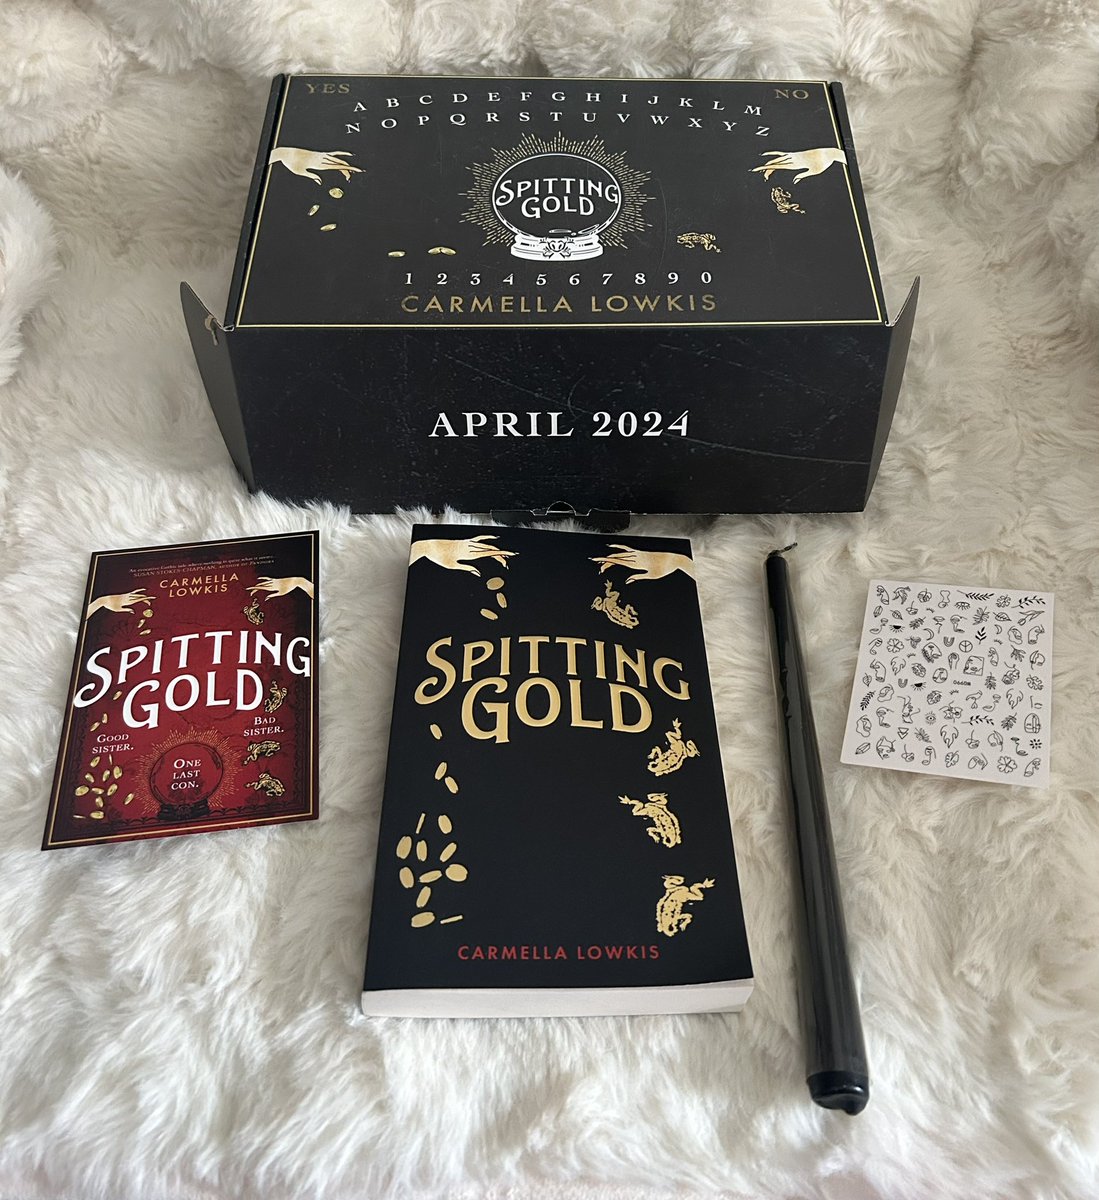 💛🖤 BOOK POST 🖤💛

Huge thanks to @carmellalowkis @DoubledayUK for my gorgeous proof box 💛🖤

#SpittingGold is out 18/4 

Susan Stokes-Chapman had this to say …. ‘An evocative Gothic tale where nothing is quite what it seems.’

So excited to get stuck in!

Out 18/4